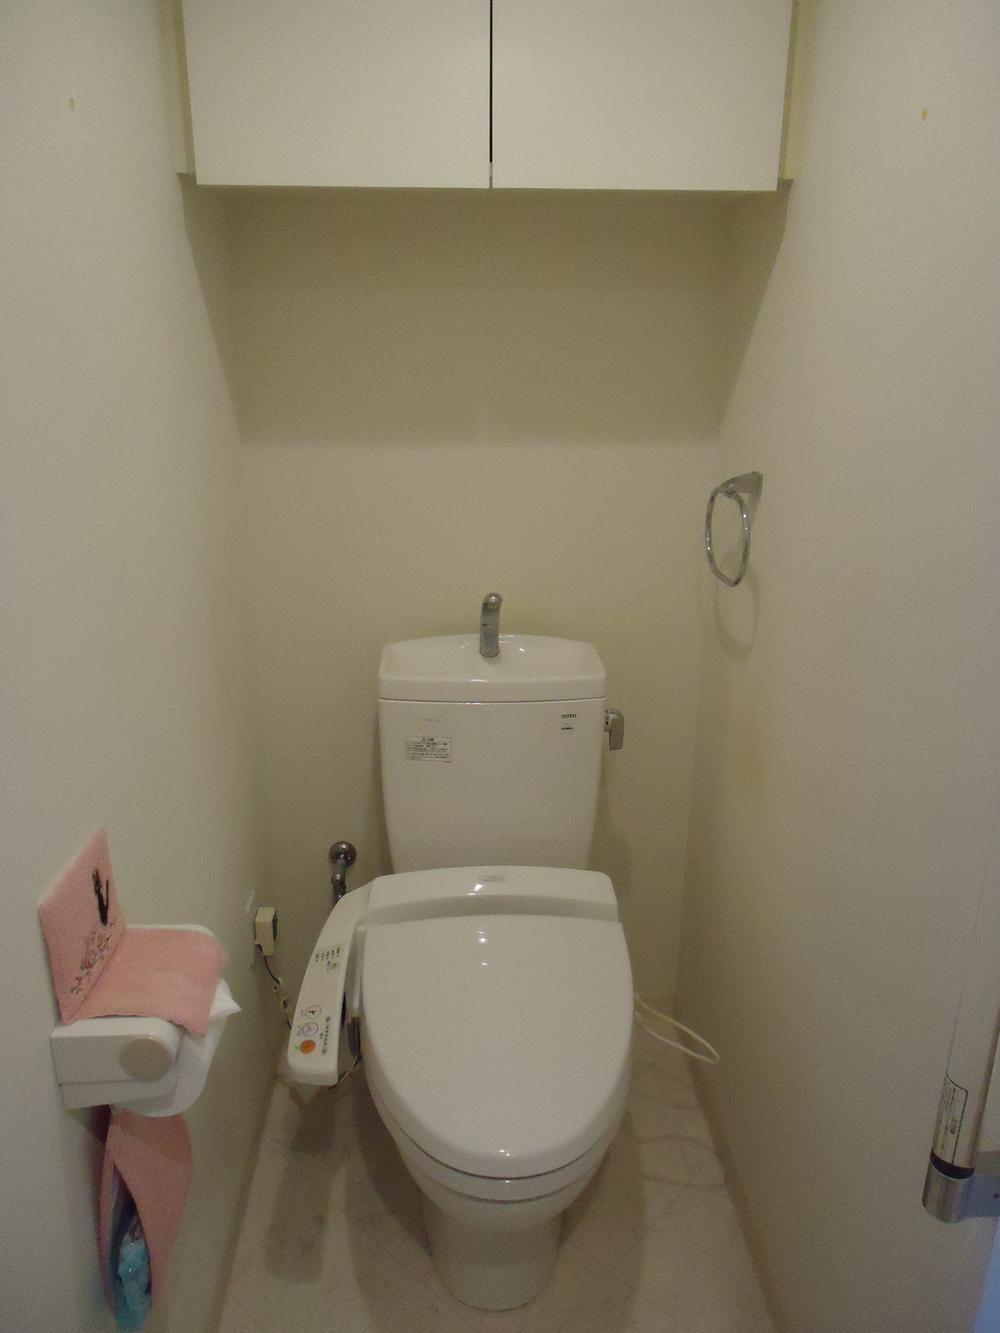 Toilet. There cupboard hanging on the top